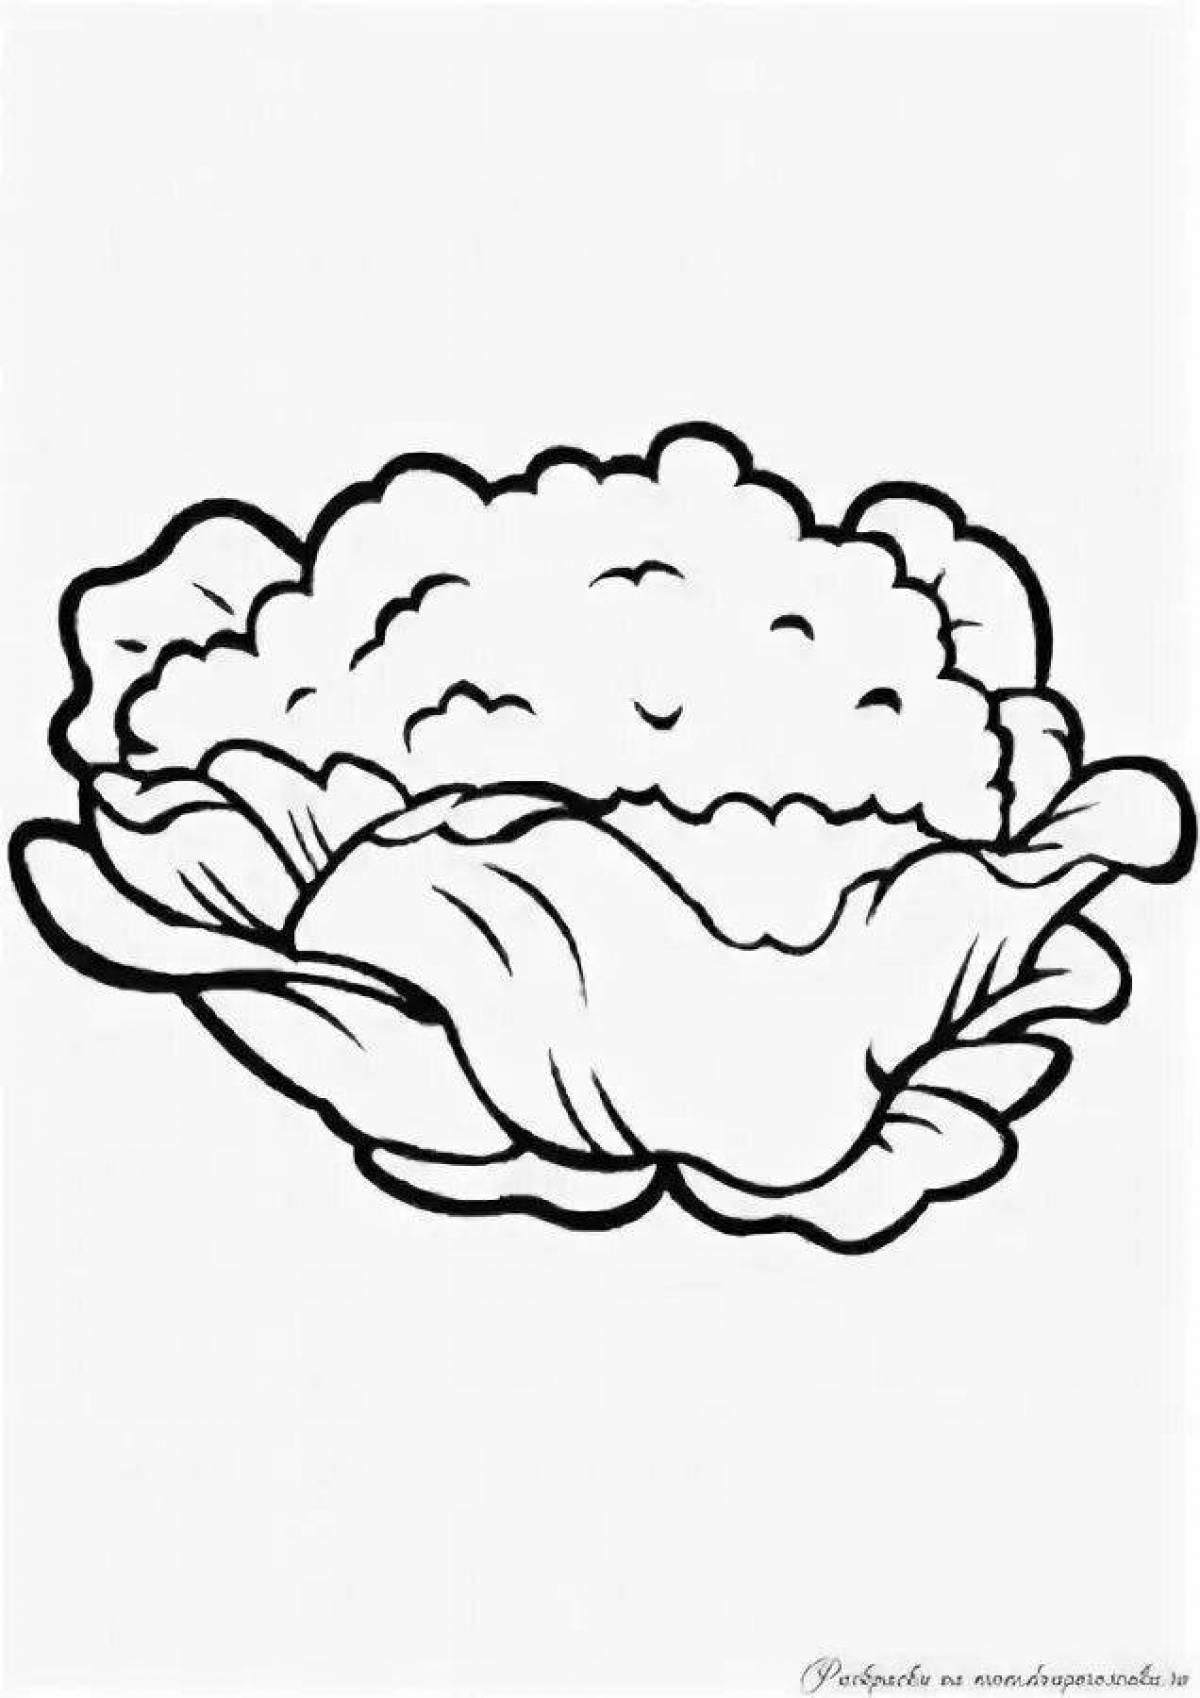 Colorful cauliflower coloring page